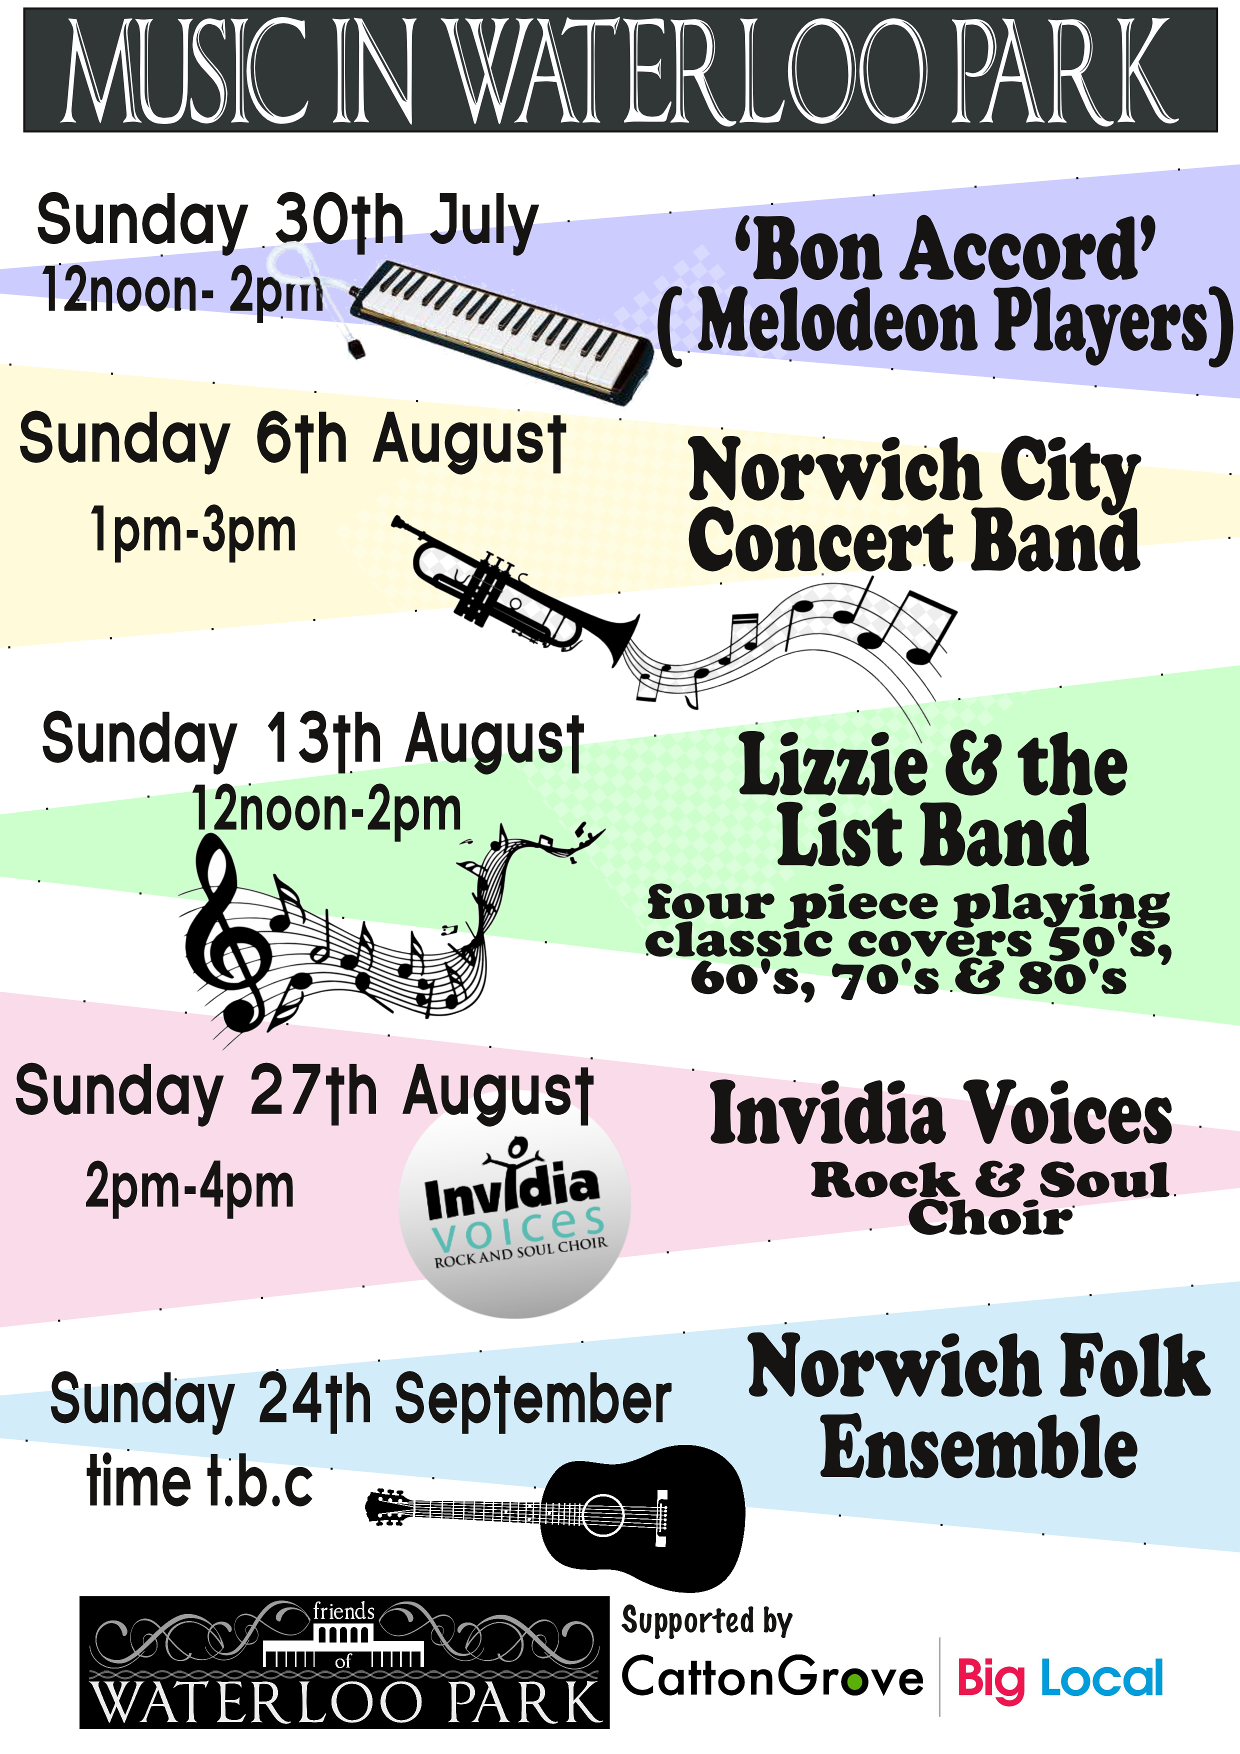 poster for music events at waterloo park